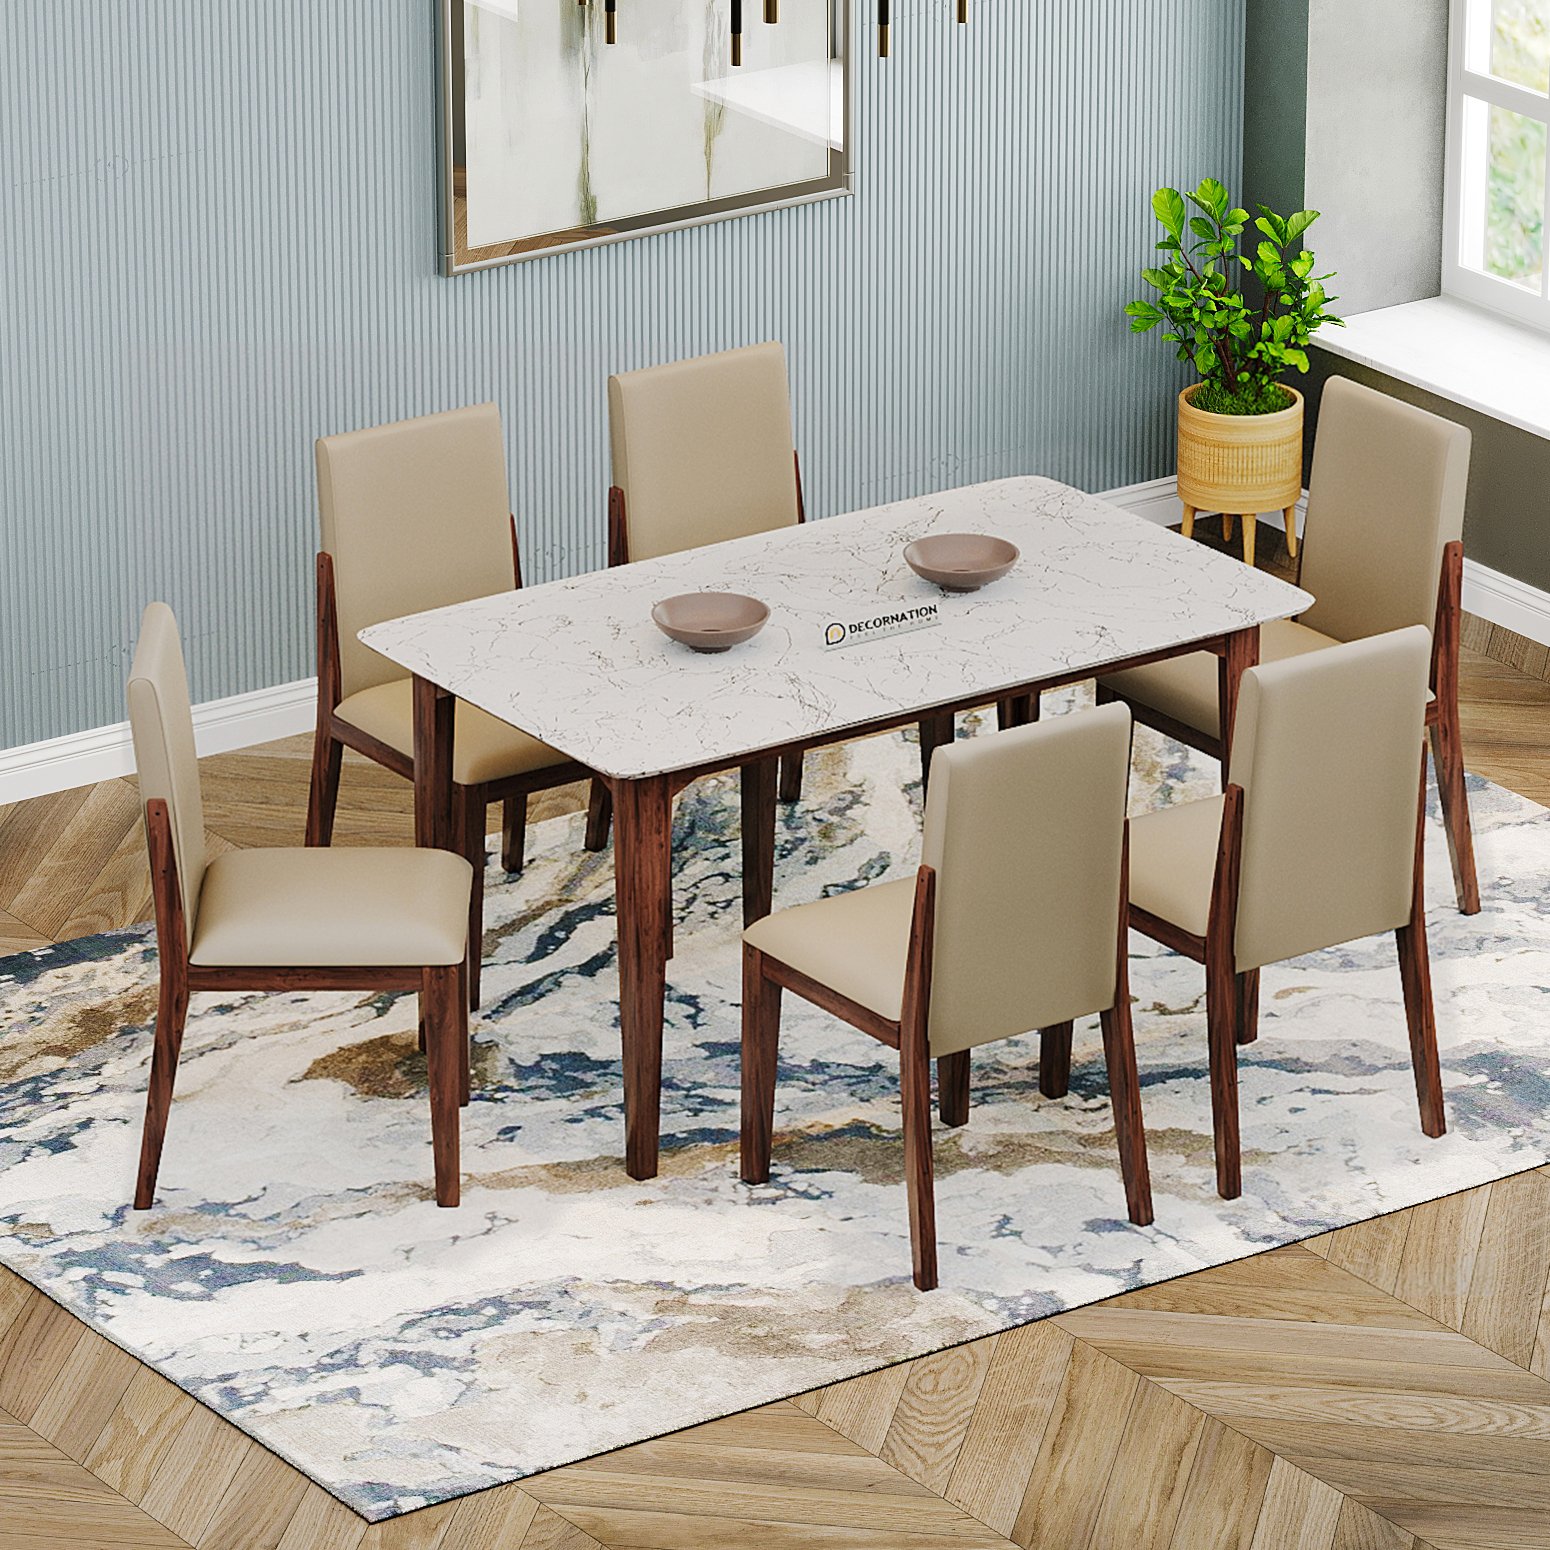 Italiana Dining Table with Chairs – White – 6 Seater